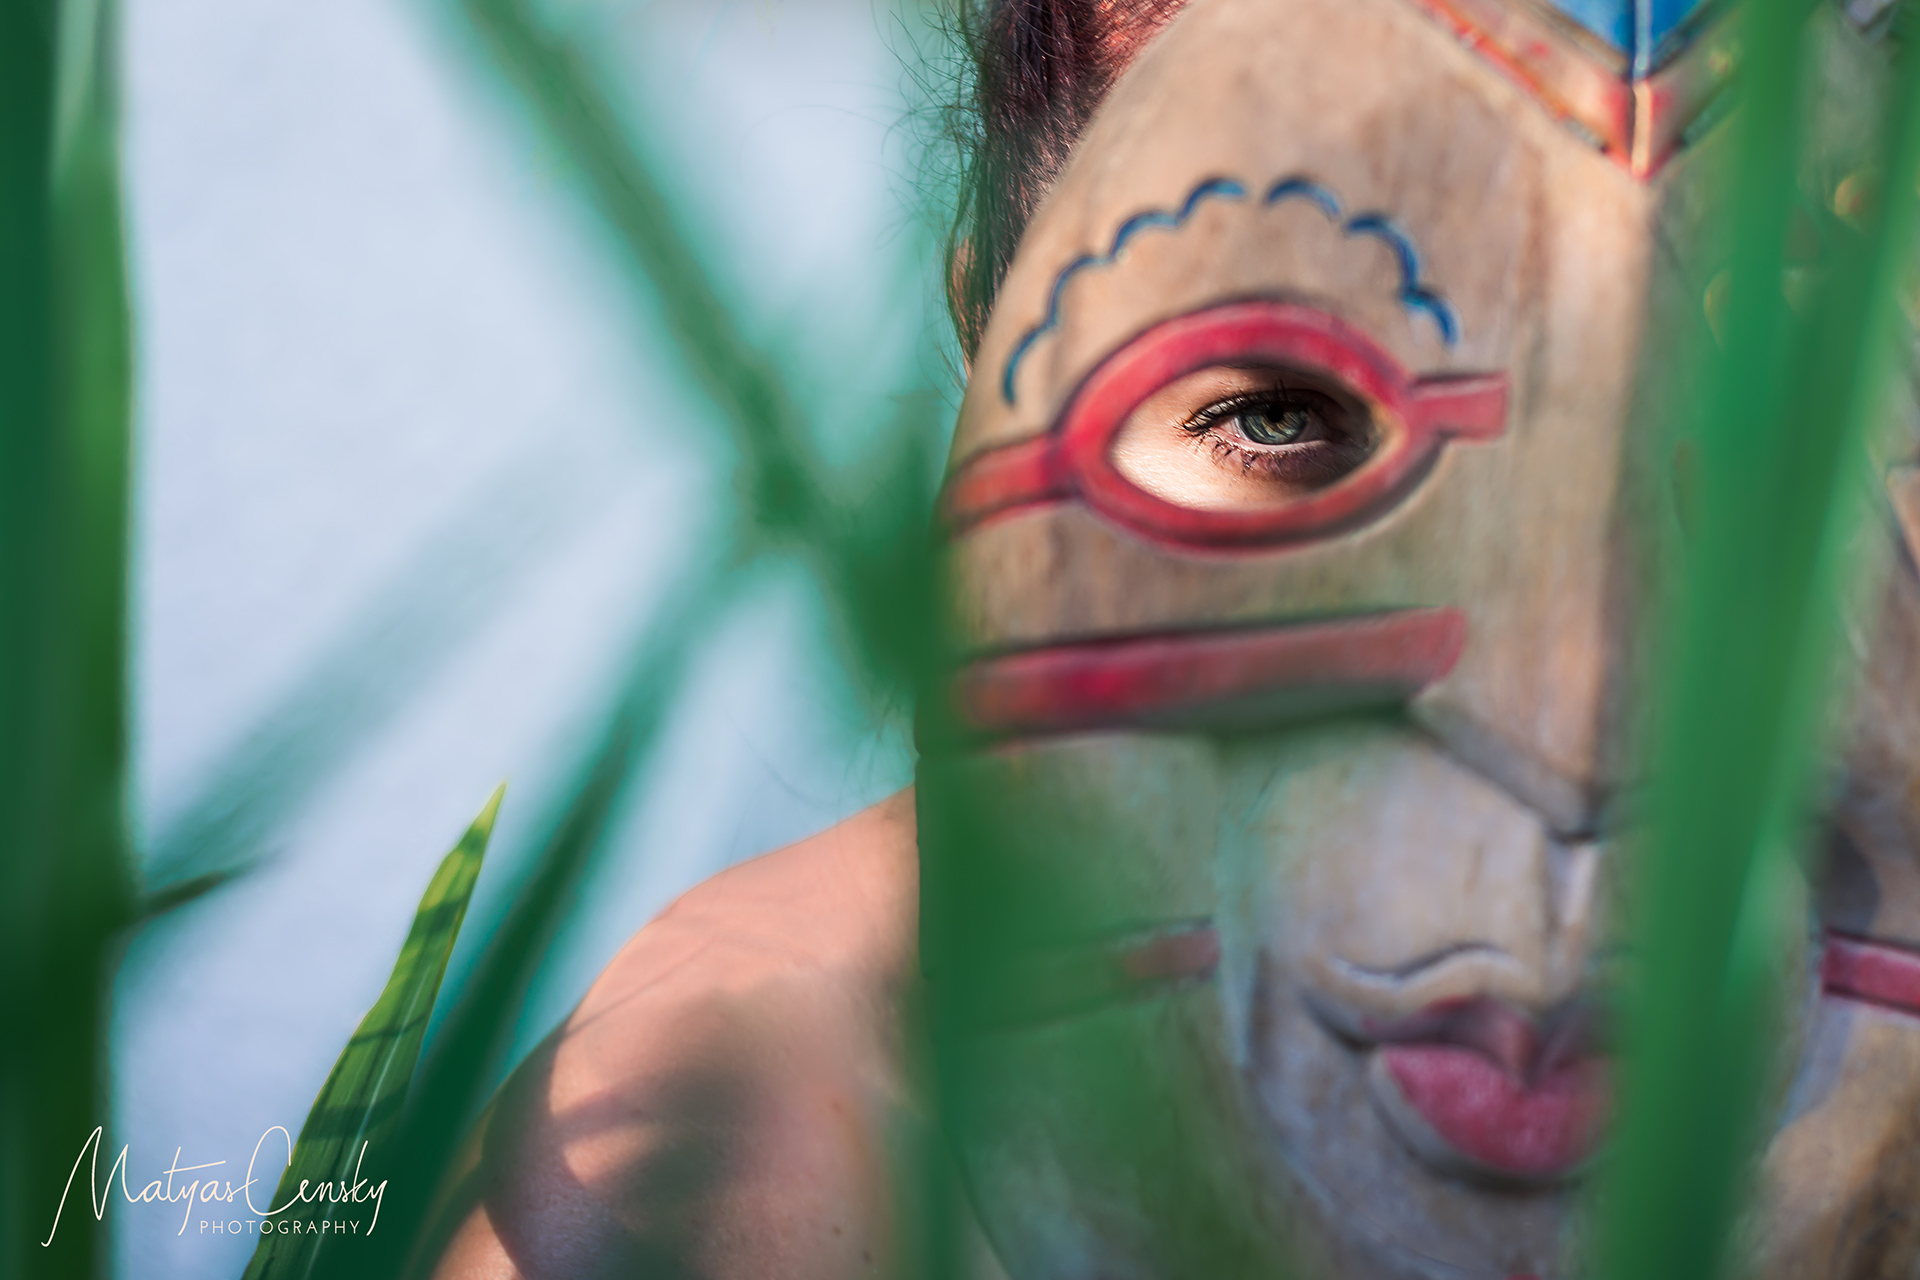 Photo of girl looking through wooden mask hiding behind green leaves focused on her eye through the mask.